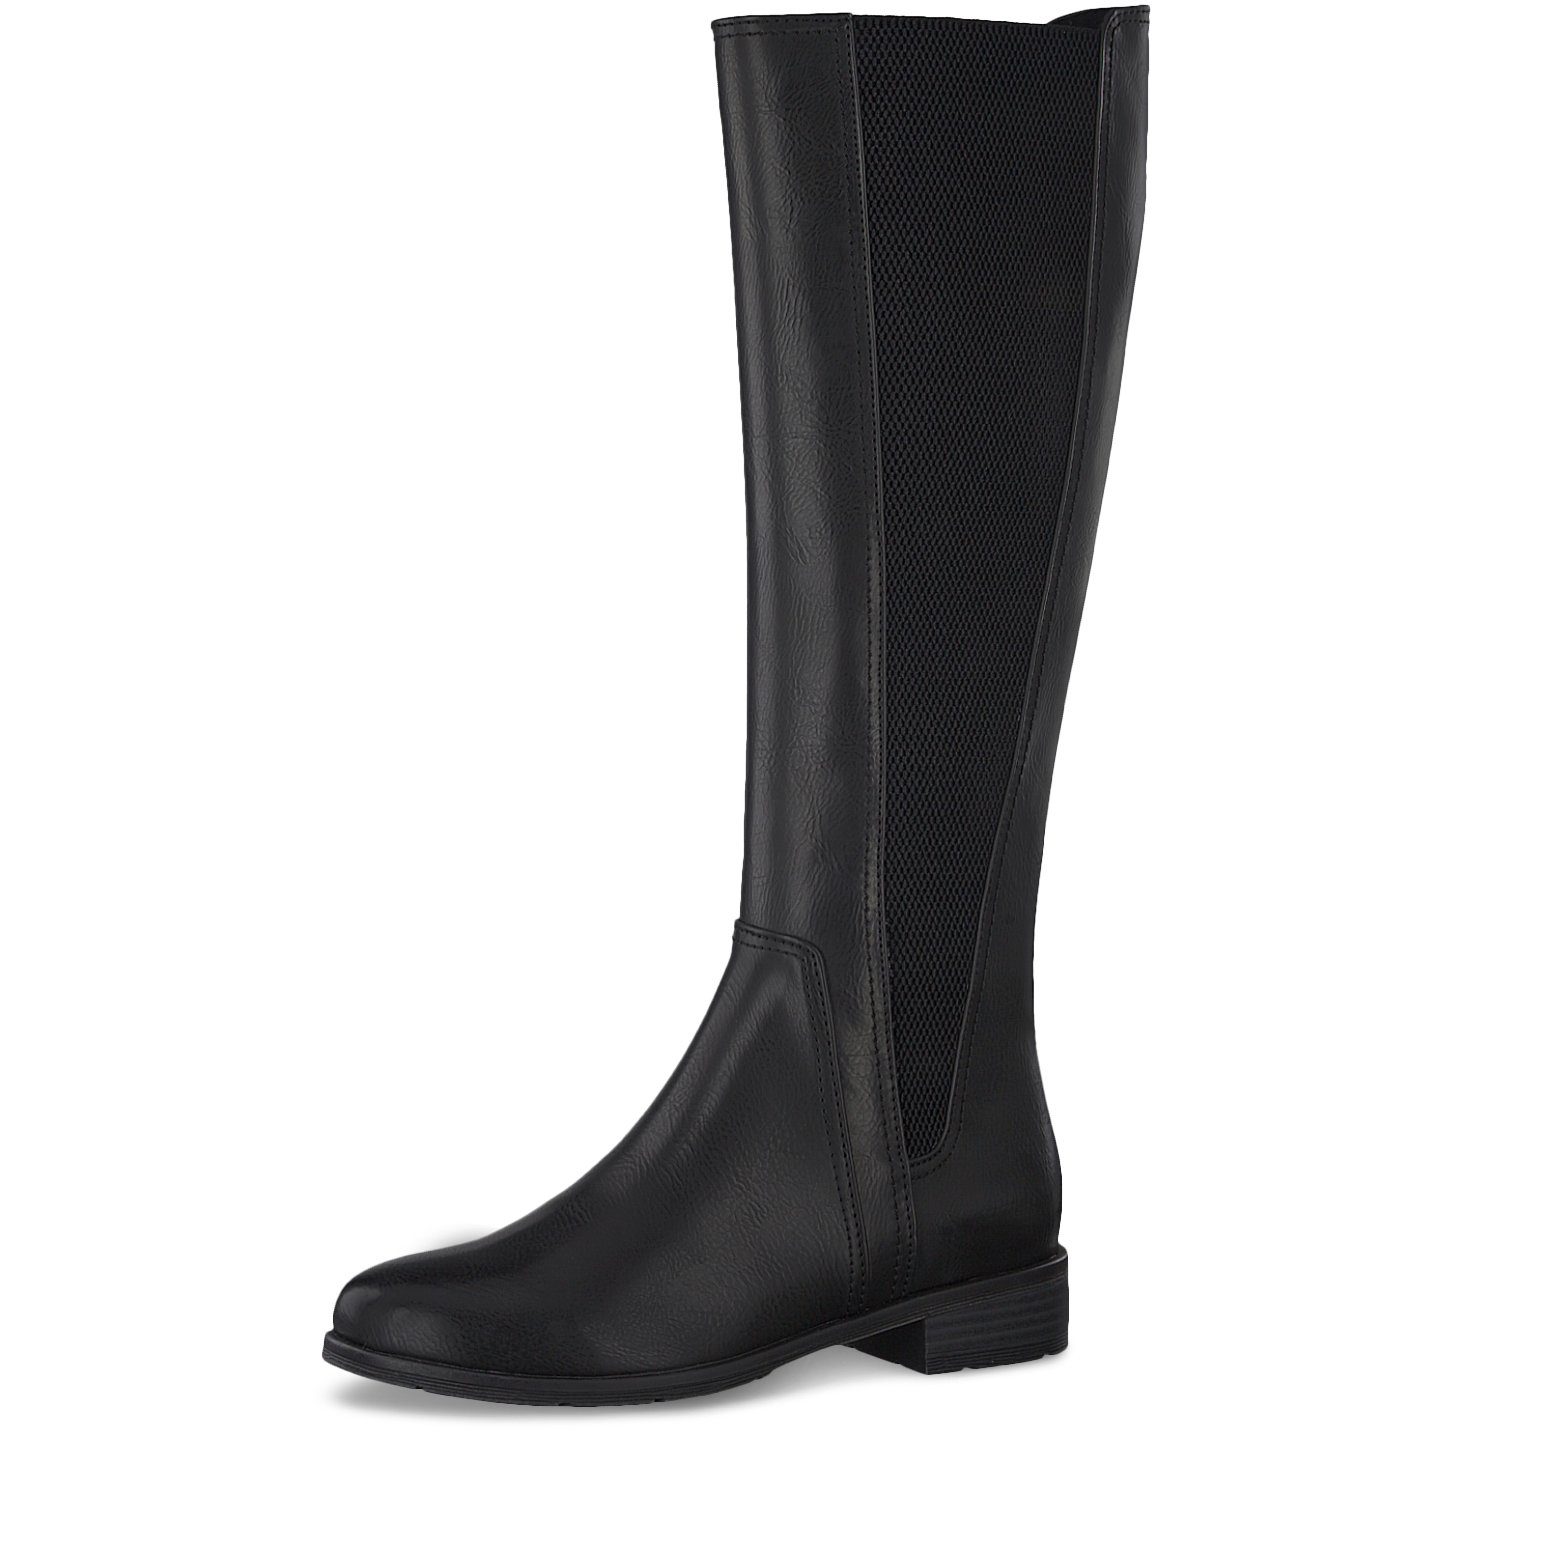 verdieping zweep horizon Boots 2-2-25528-23: Buy Boots from Marco Tozzi online!